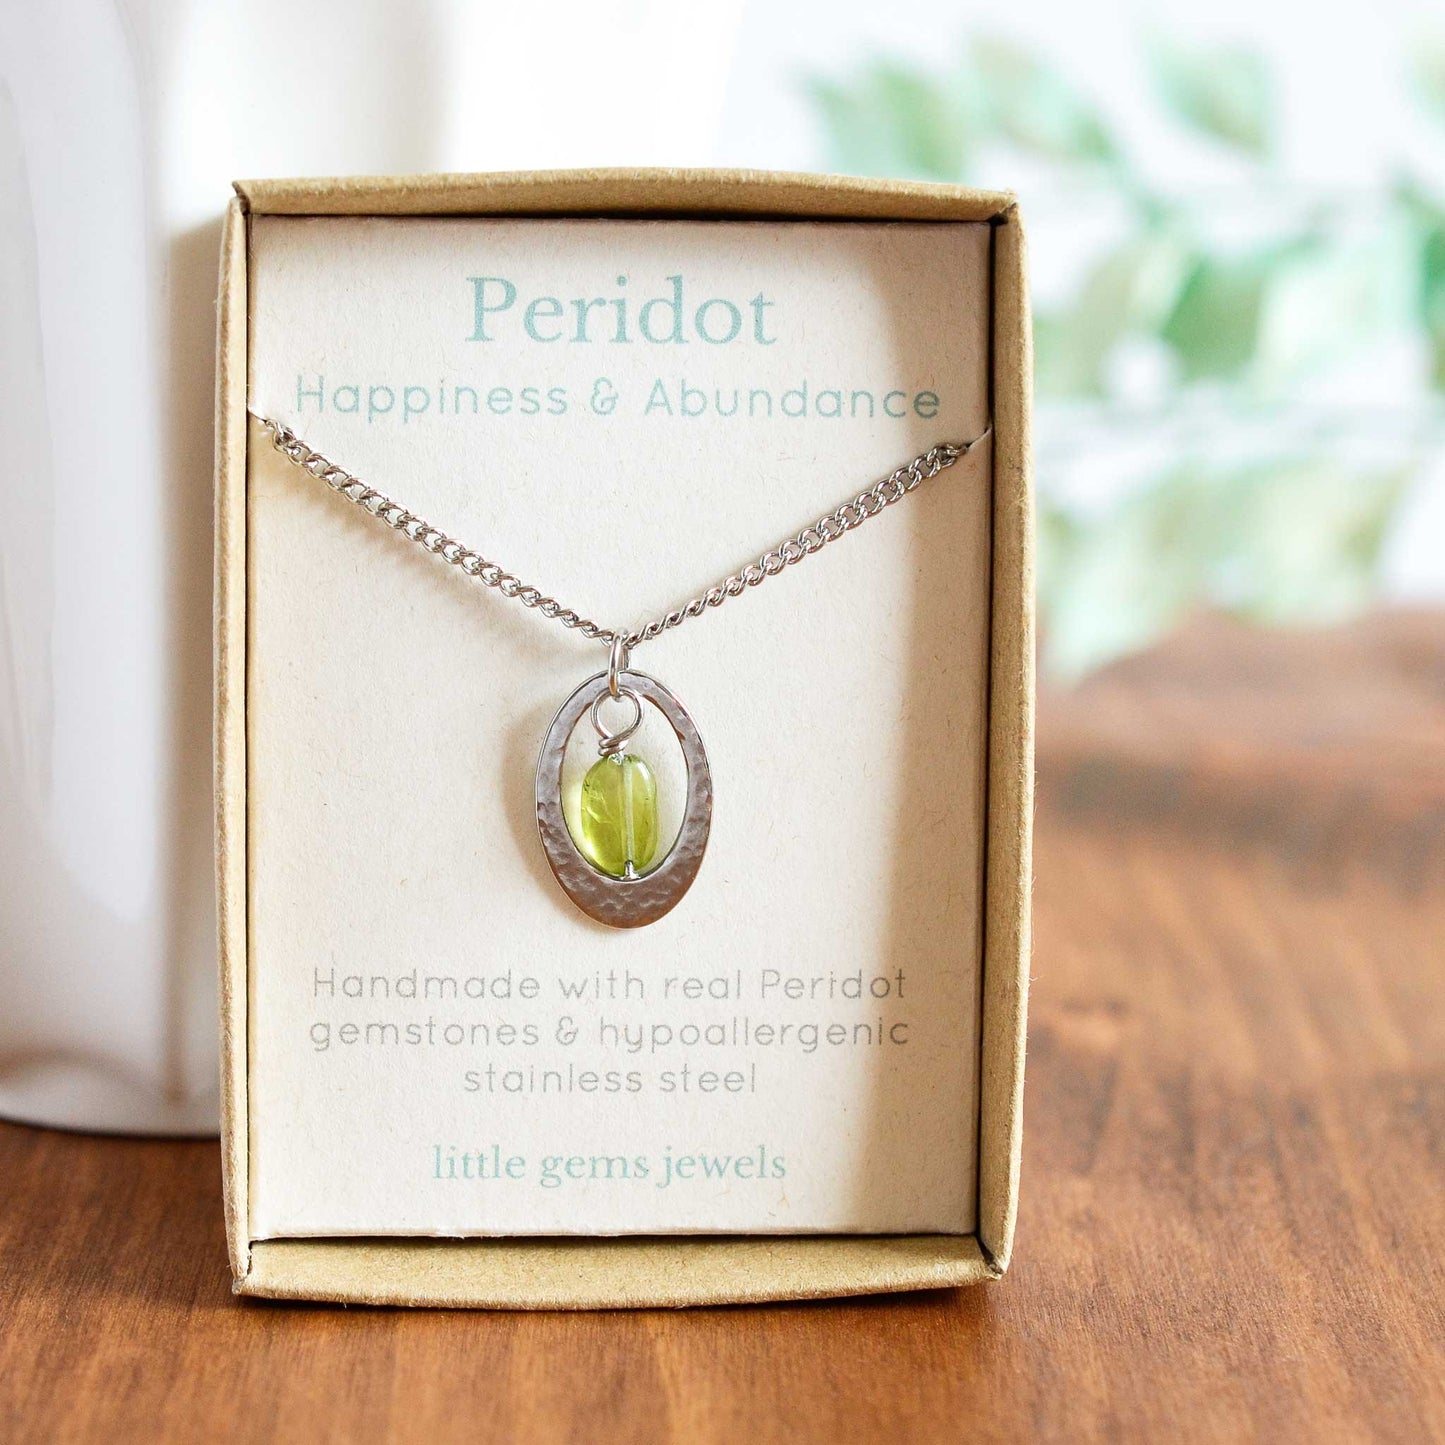 Oval pendant necklace with Peridot gemstone in gift box